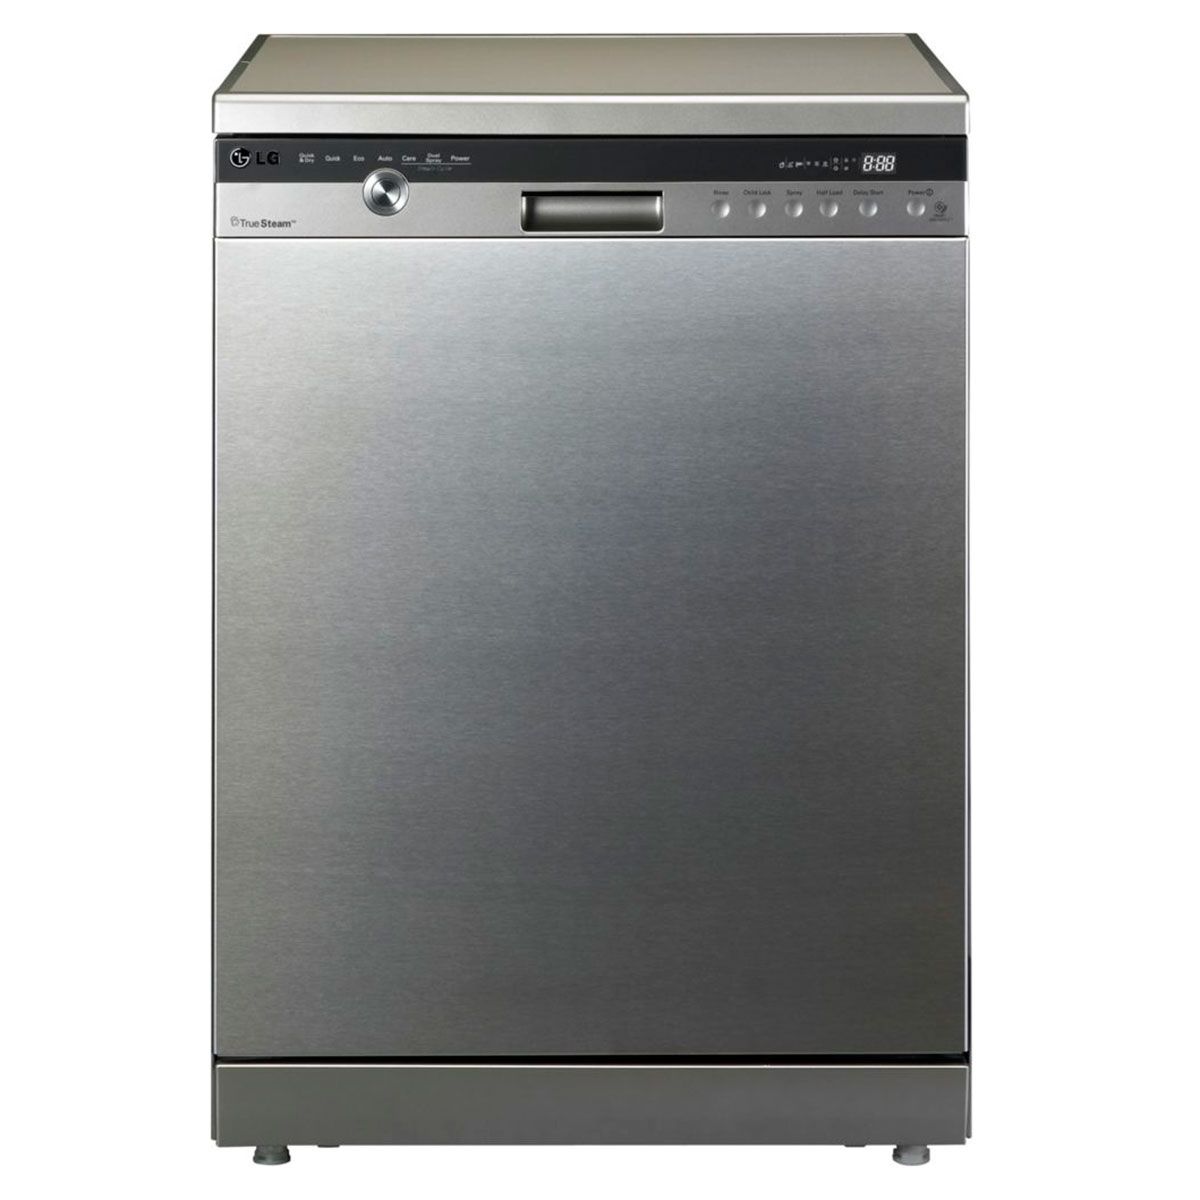 lg direct drive dishwasher review